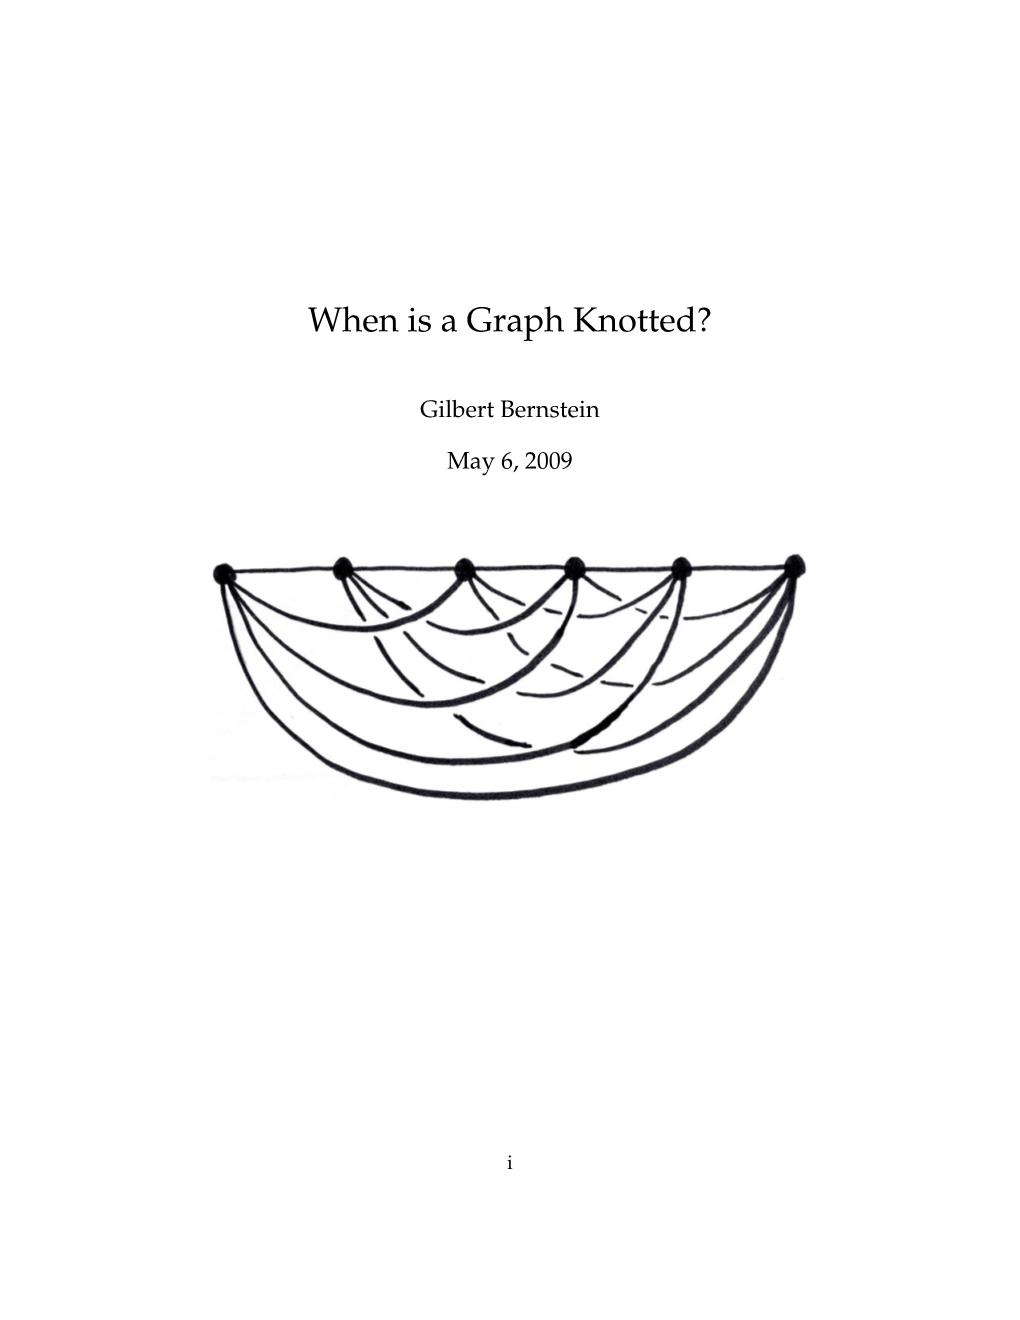 When Is a Graph Knotted?